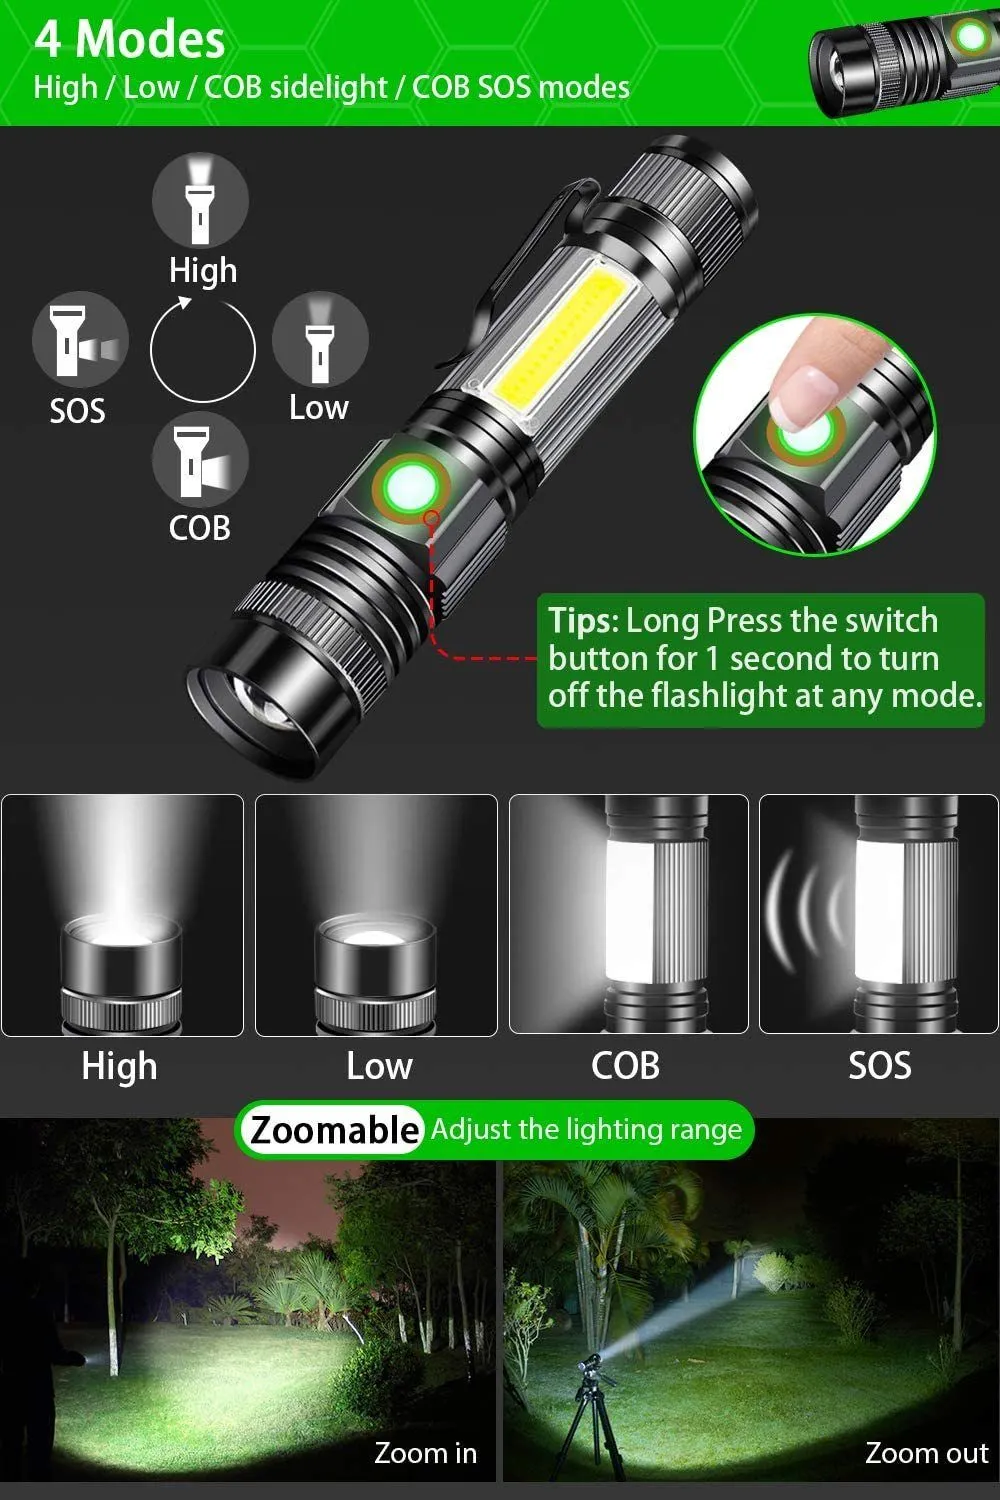 8000LM USB Rechargeable Flashlight Super Bright Magnetic LED Torch with Cob Sidelight a pocket clip Zoomable for Camping 2103224484341